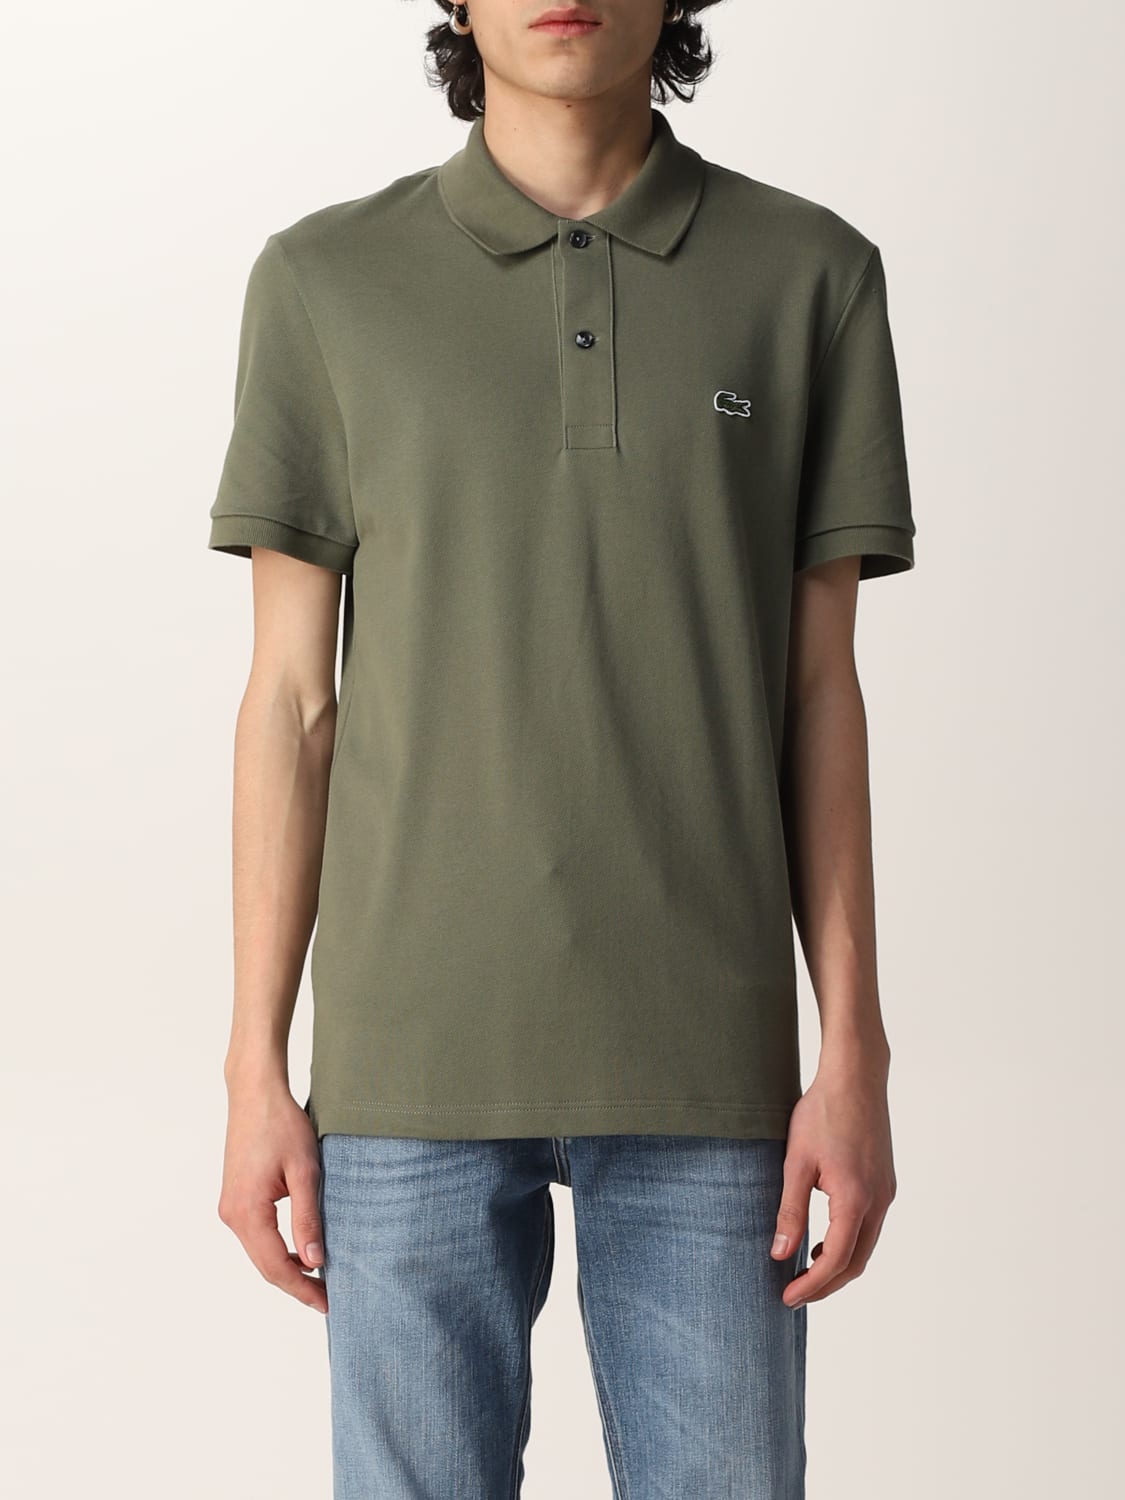 gloeilamp lus Martin Luther King Junior Lacoste Outlet: basic polo shirt with logo - Kaki | Lacoste polo shirt  PH4012 online on GIGLIO.COM